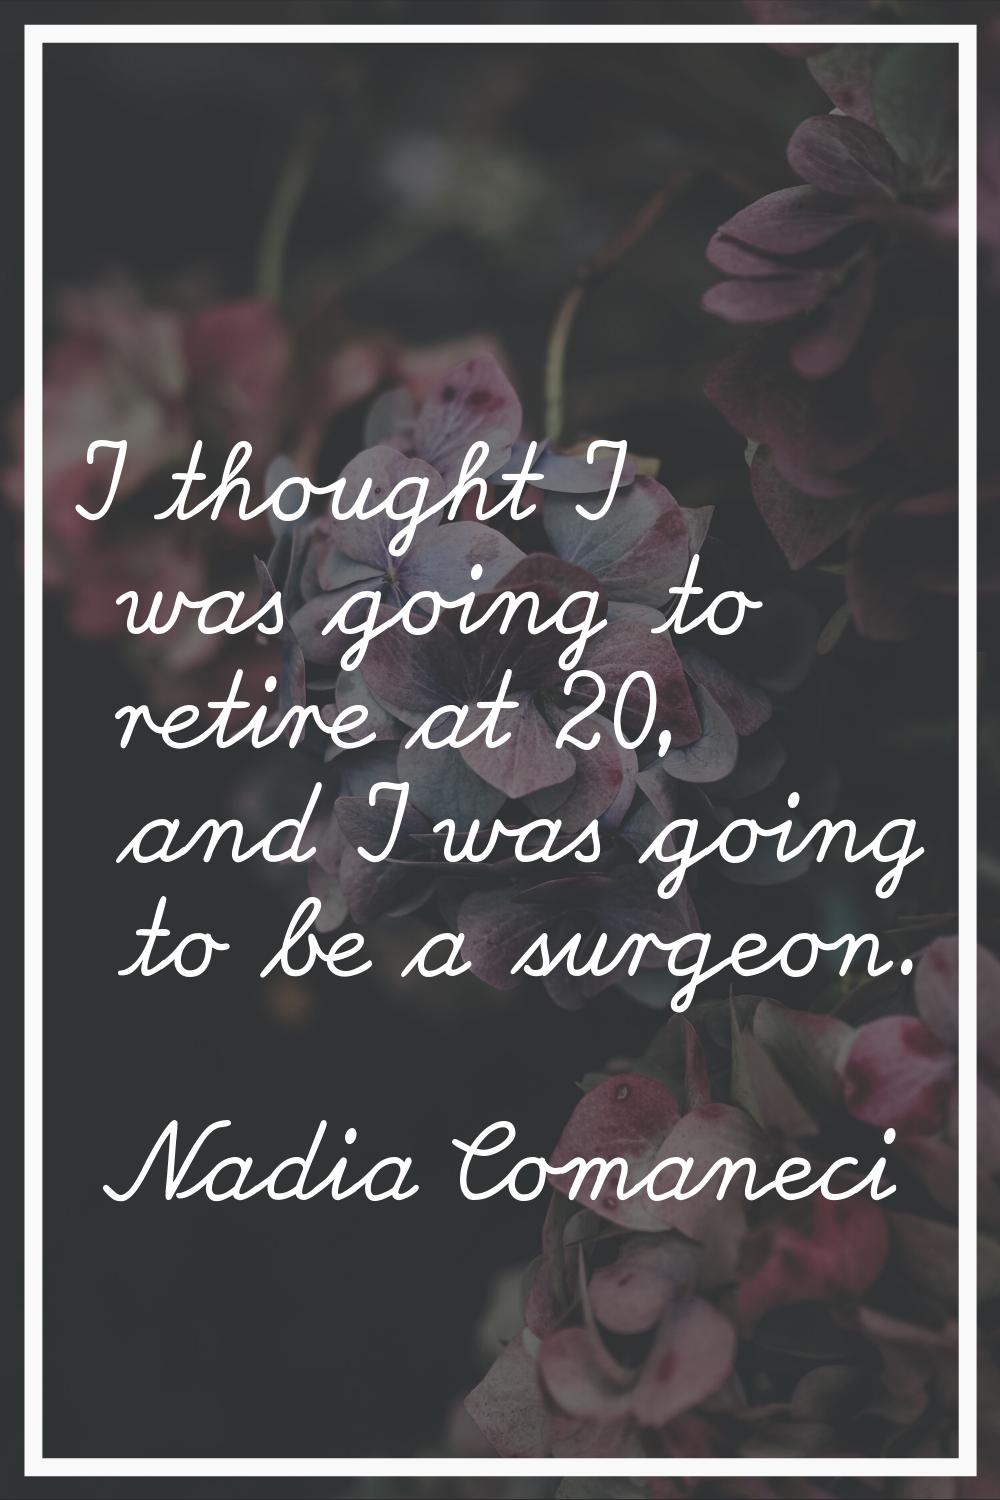 I thought I was going to retire at 20, and I was going to be a surgeon.